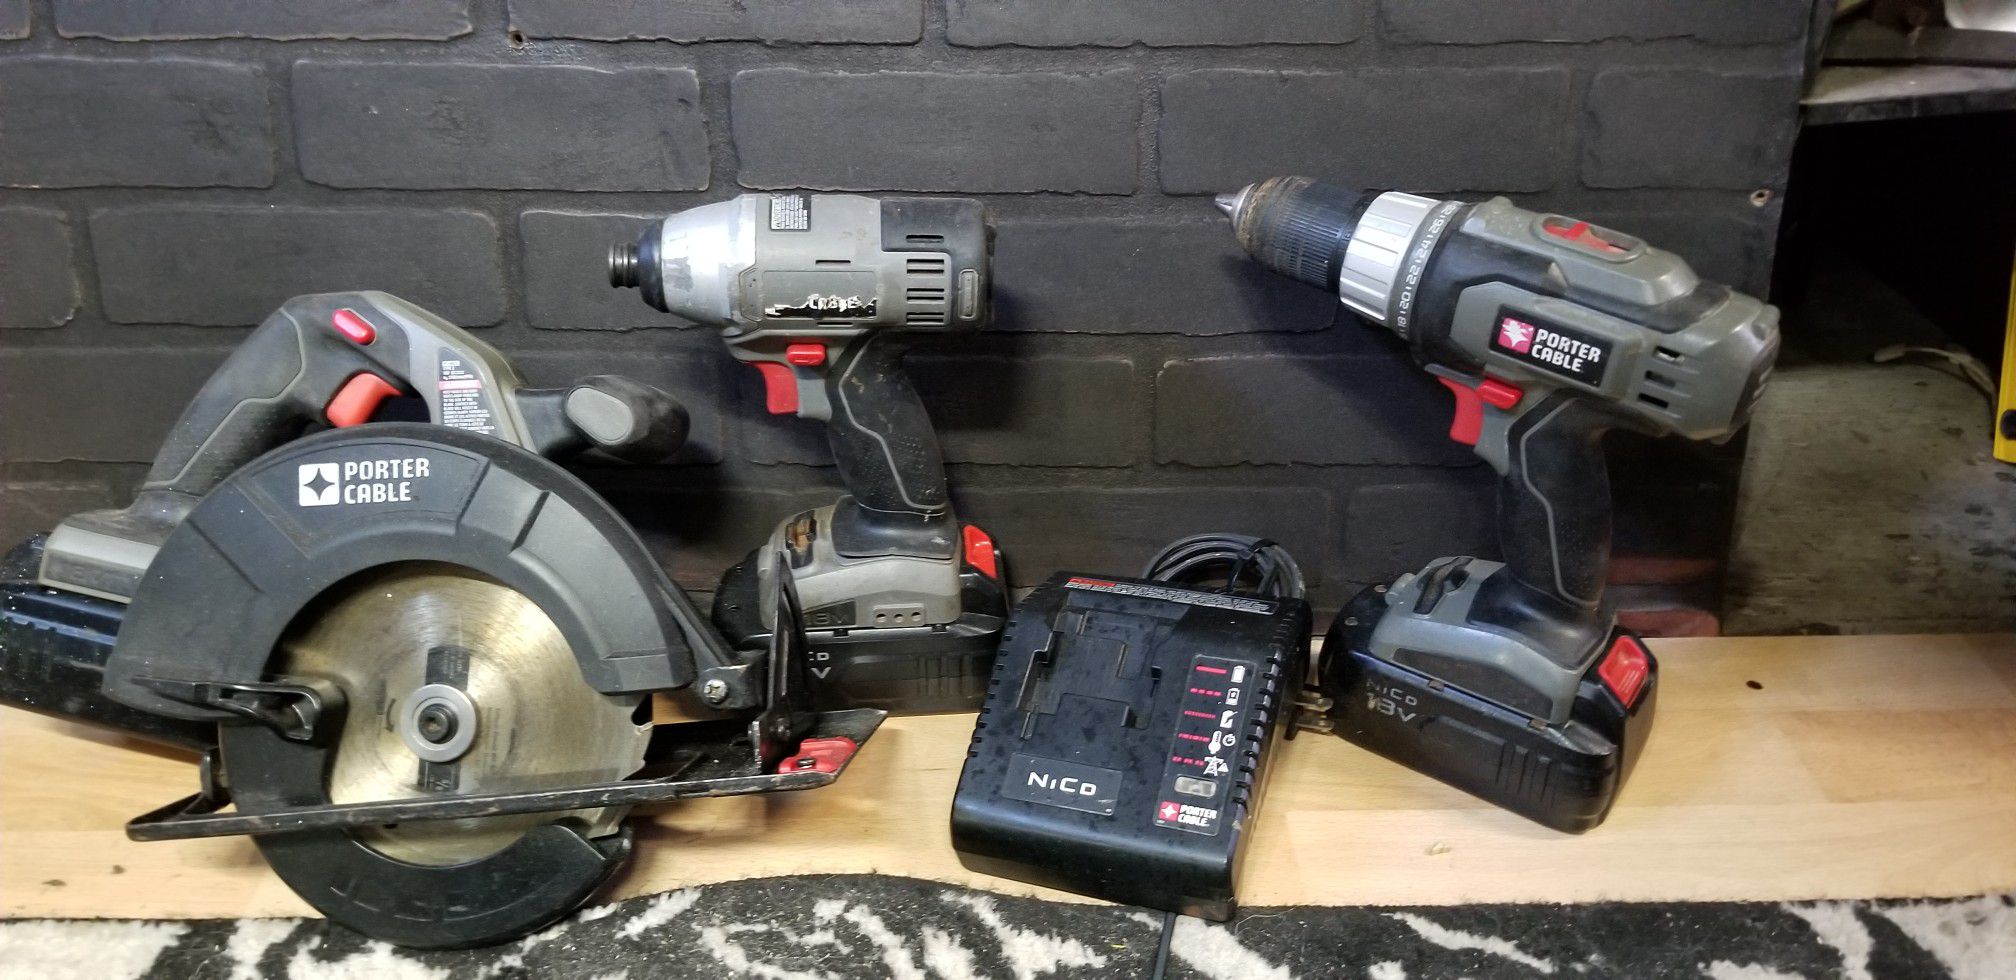 18v Porter Cable .Drill and impact and circular saw.